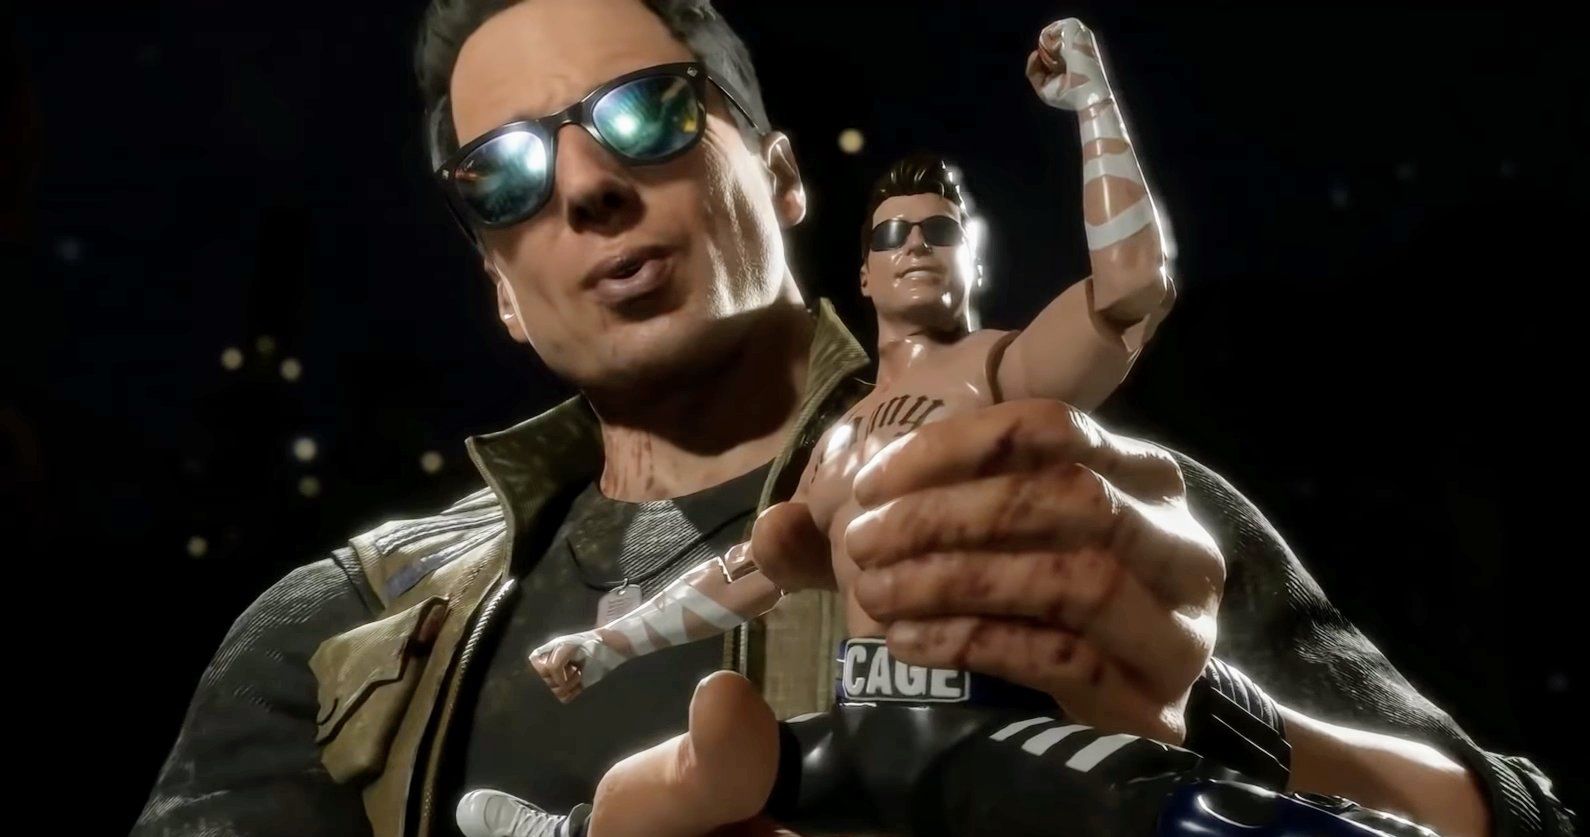 Mortal Kombat Co-Creator Reveals Why Johnny Cage Was Really Cut from Game Sequels